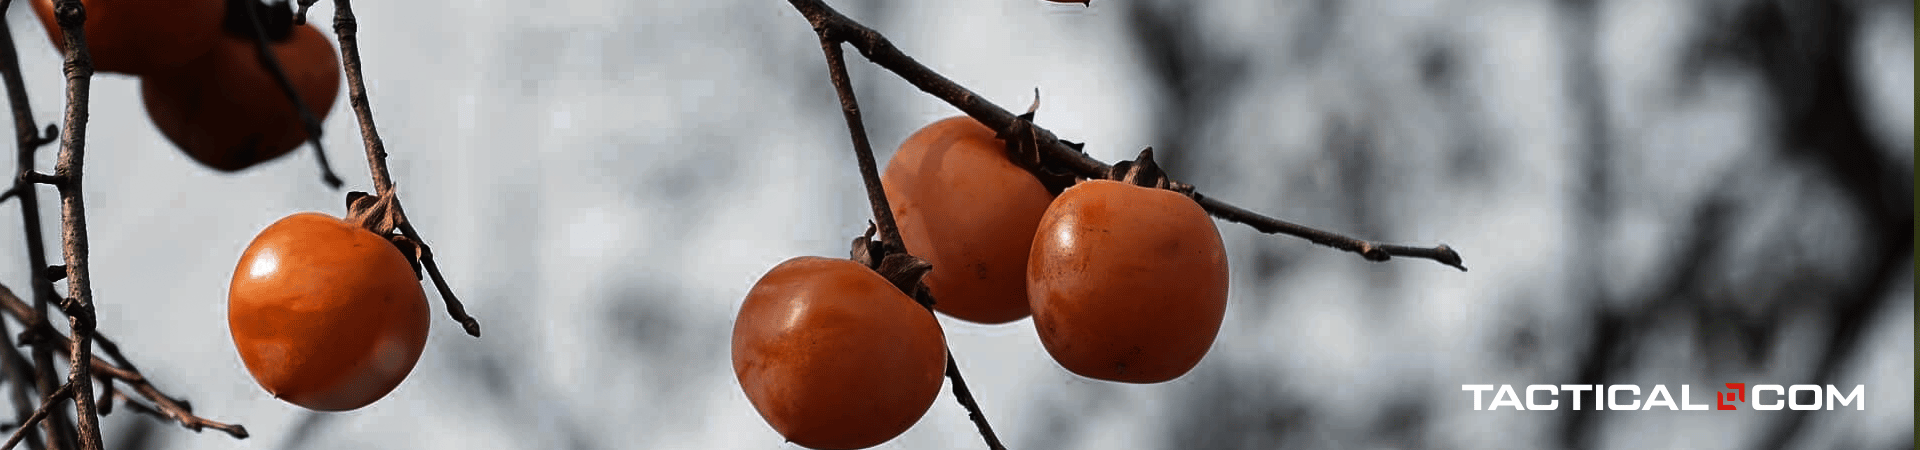 if you find persimmons in the wild, you can have something to eat